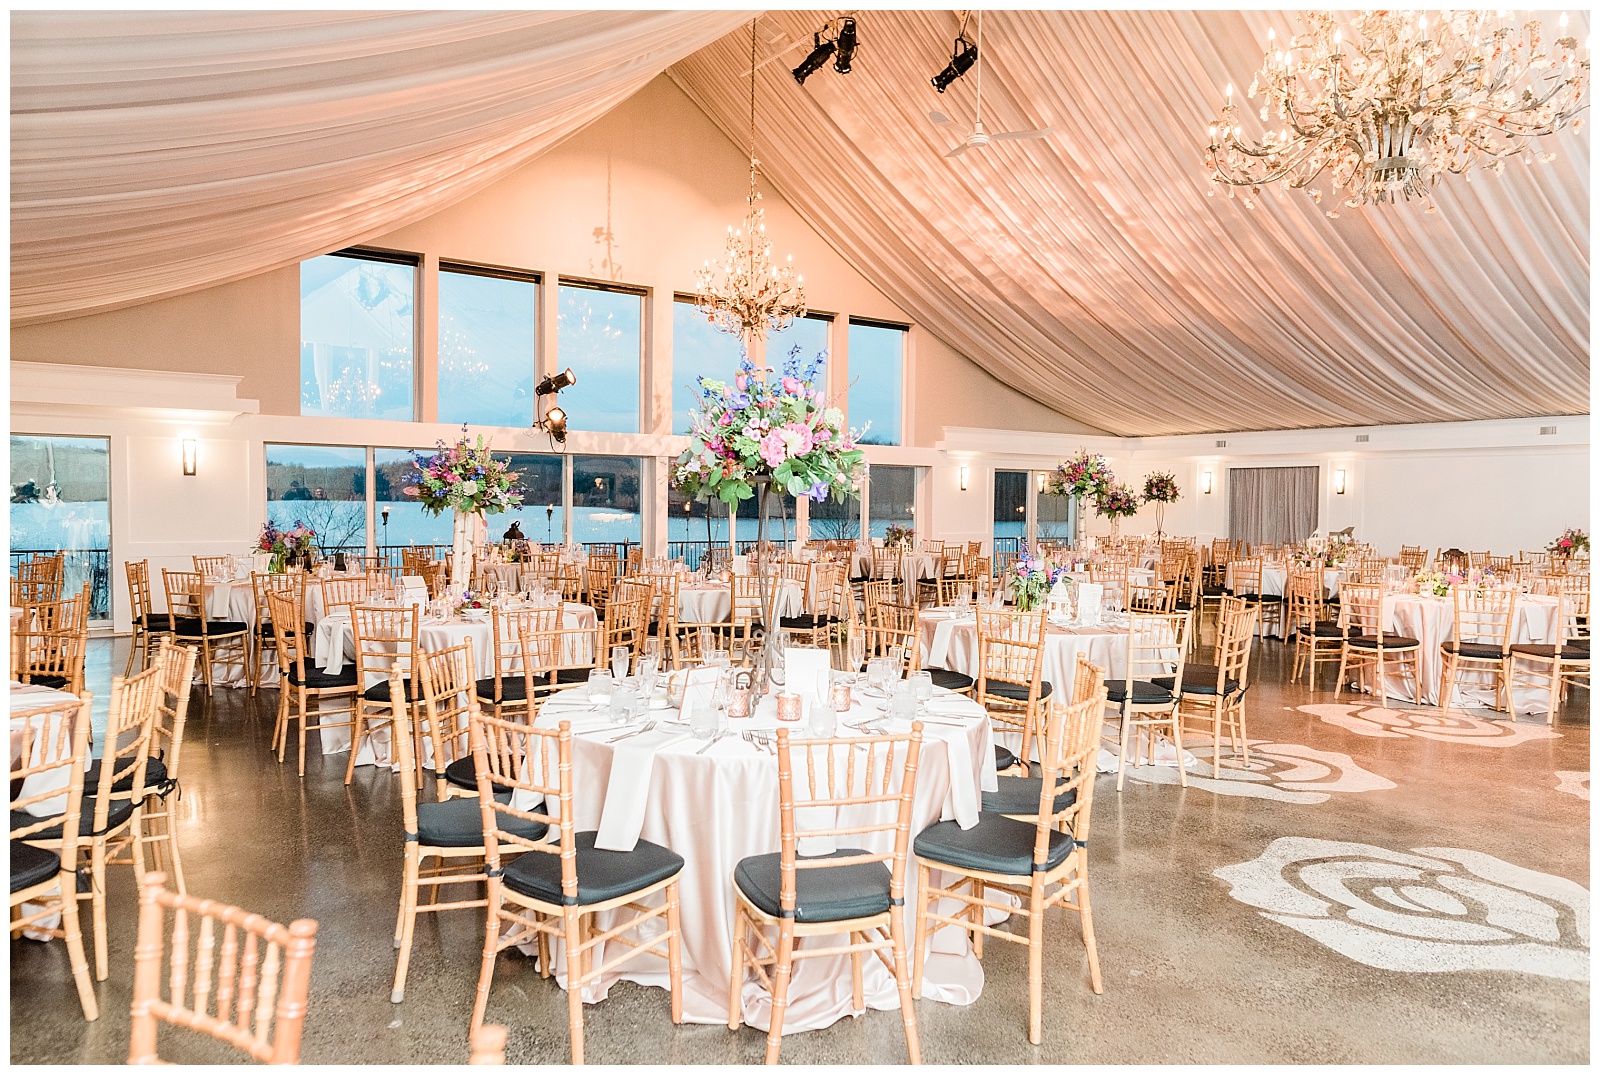 The ballroom set up for the wedding reception at the Lake House Inn in Perkasie, Pennsylvania.